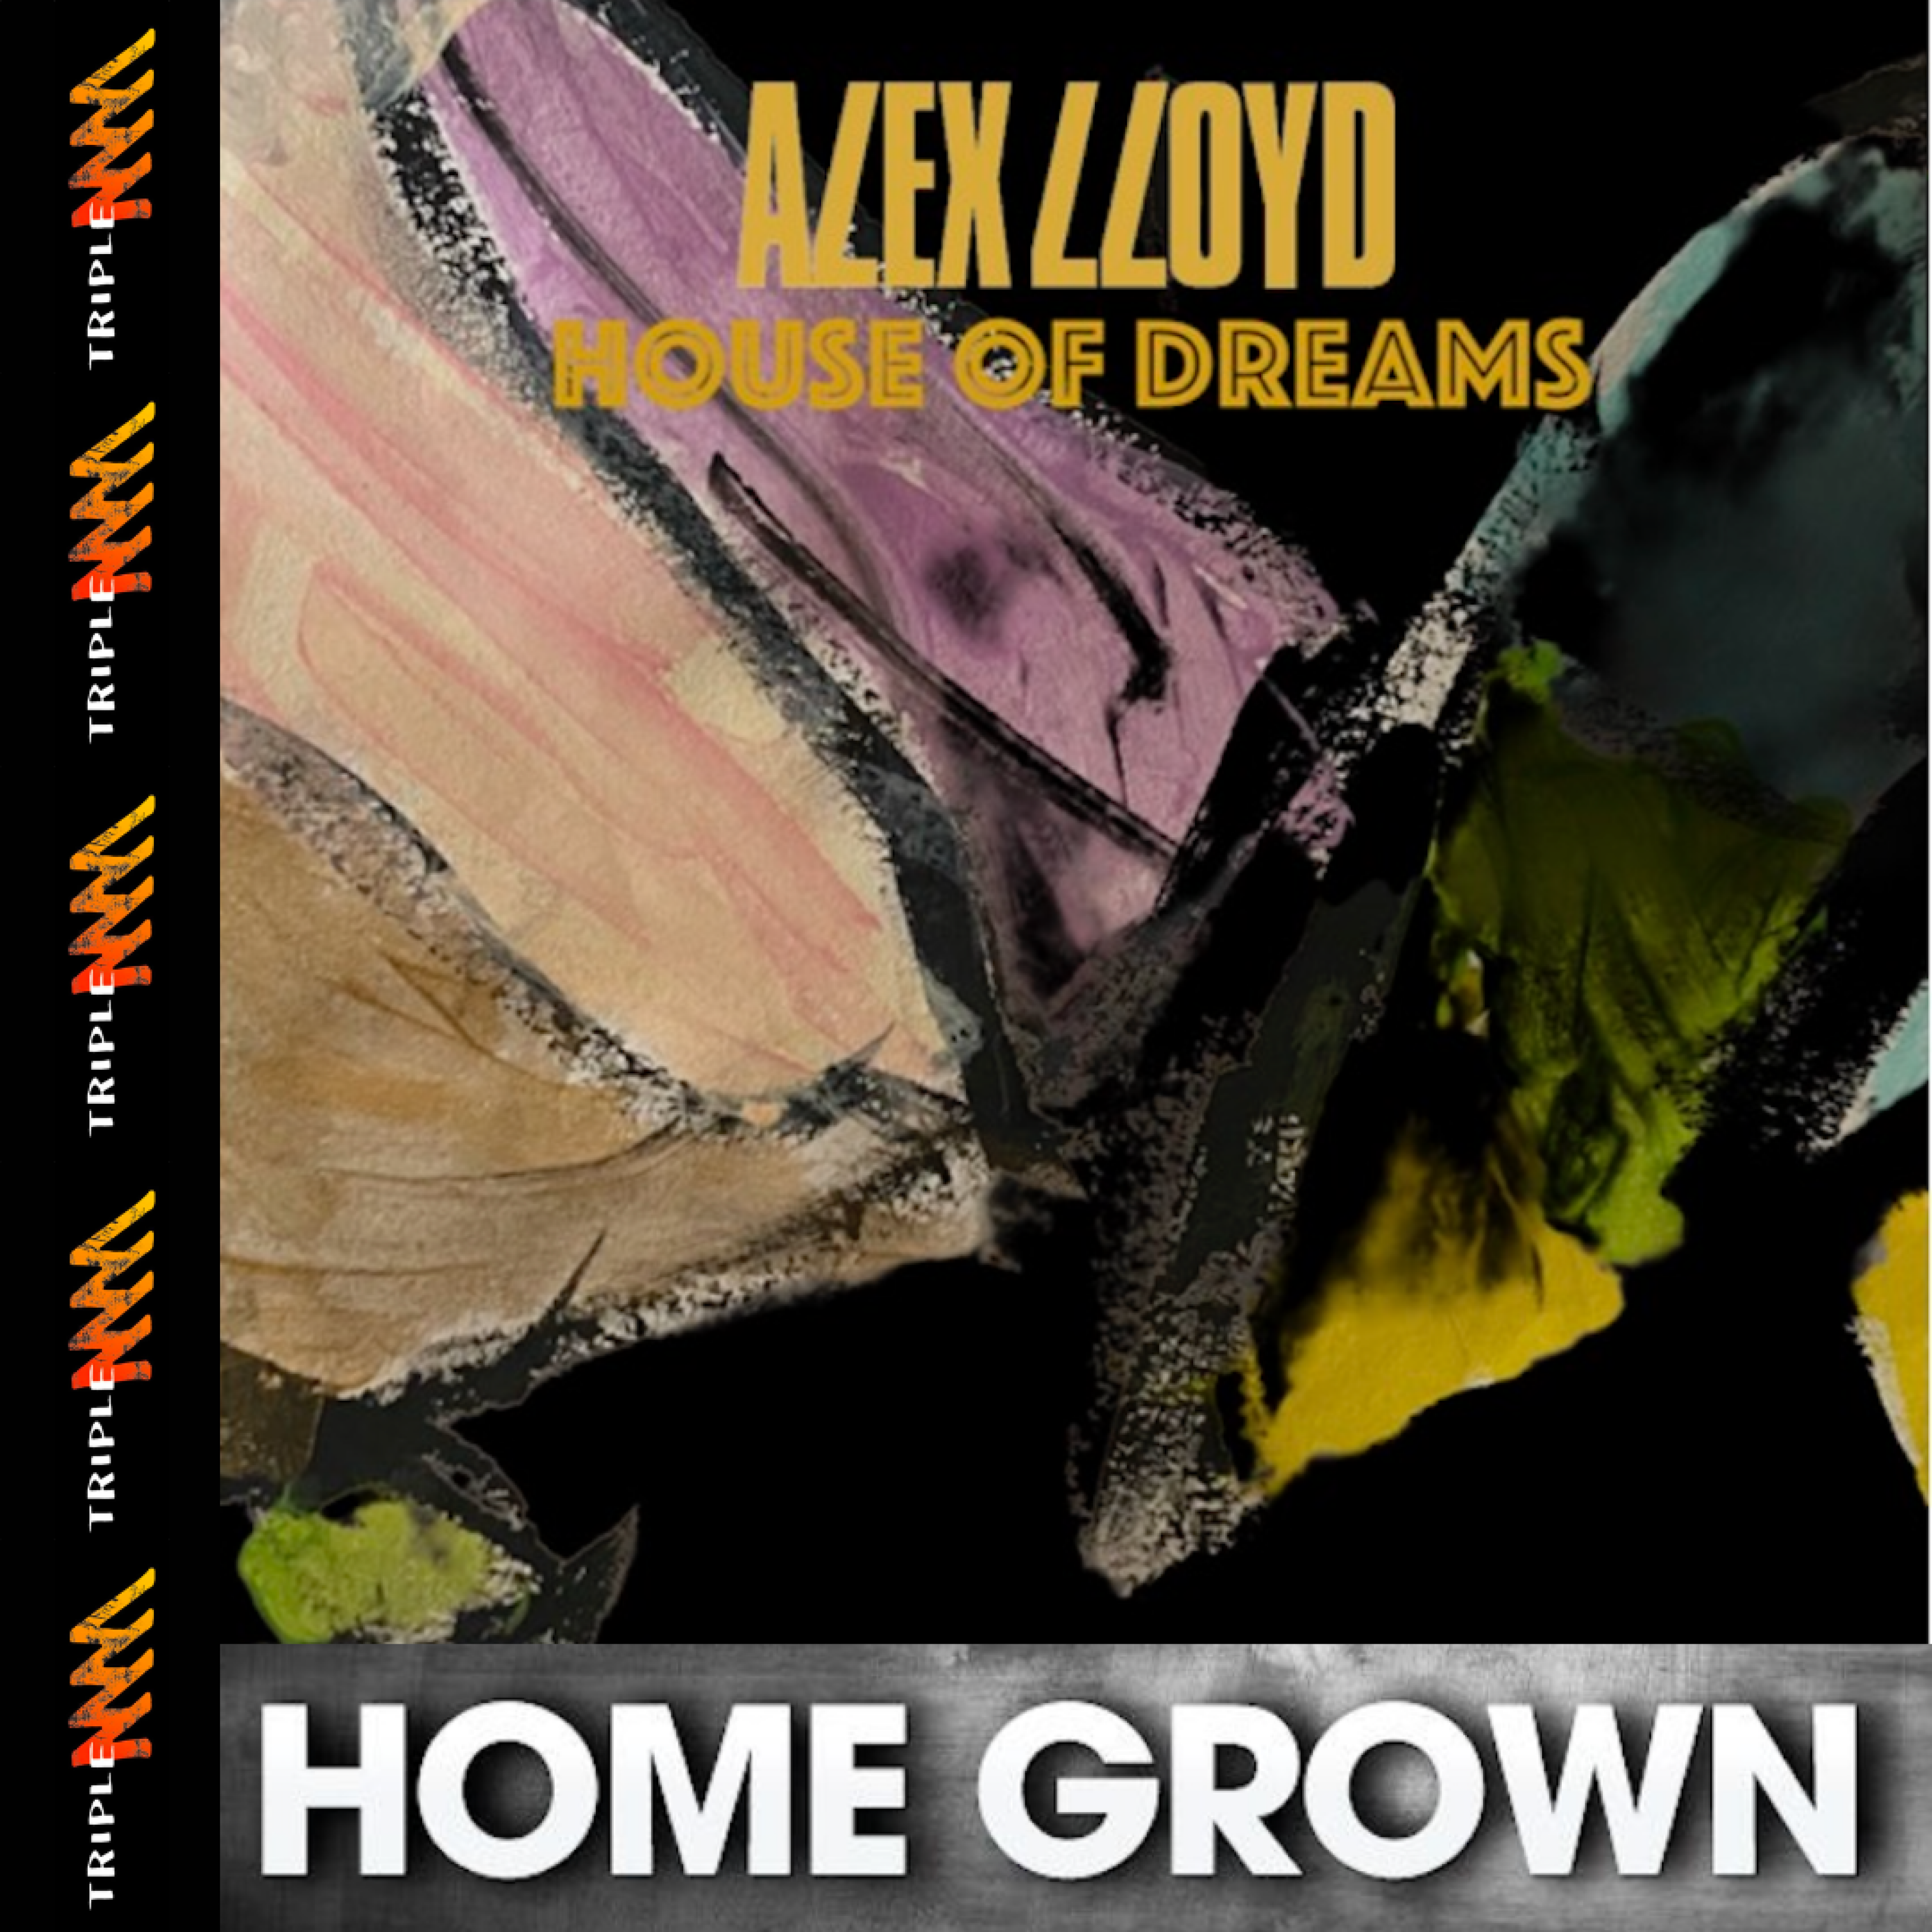 Alex Lloyd - 'House Of Dreams' Added to Triple M 'Homegrown'